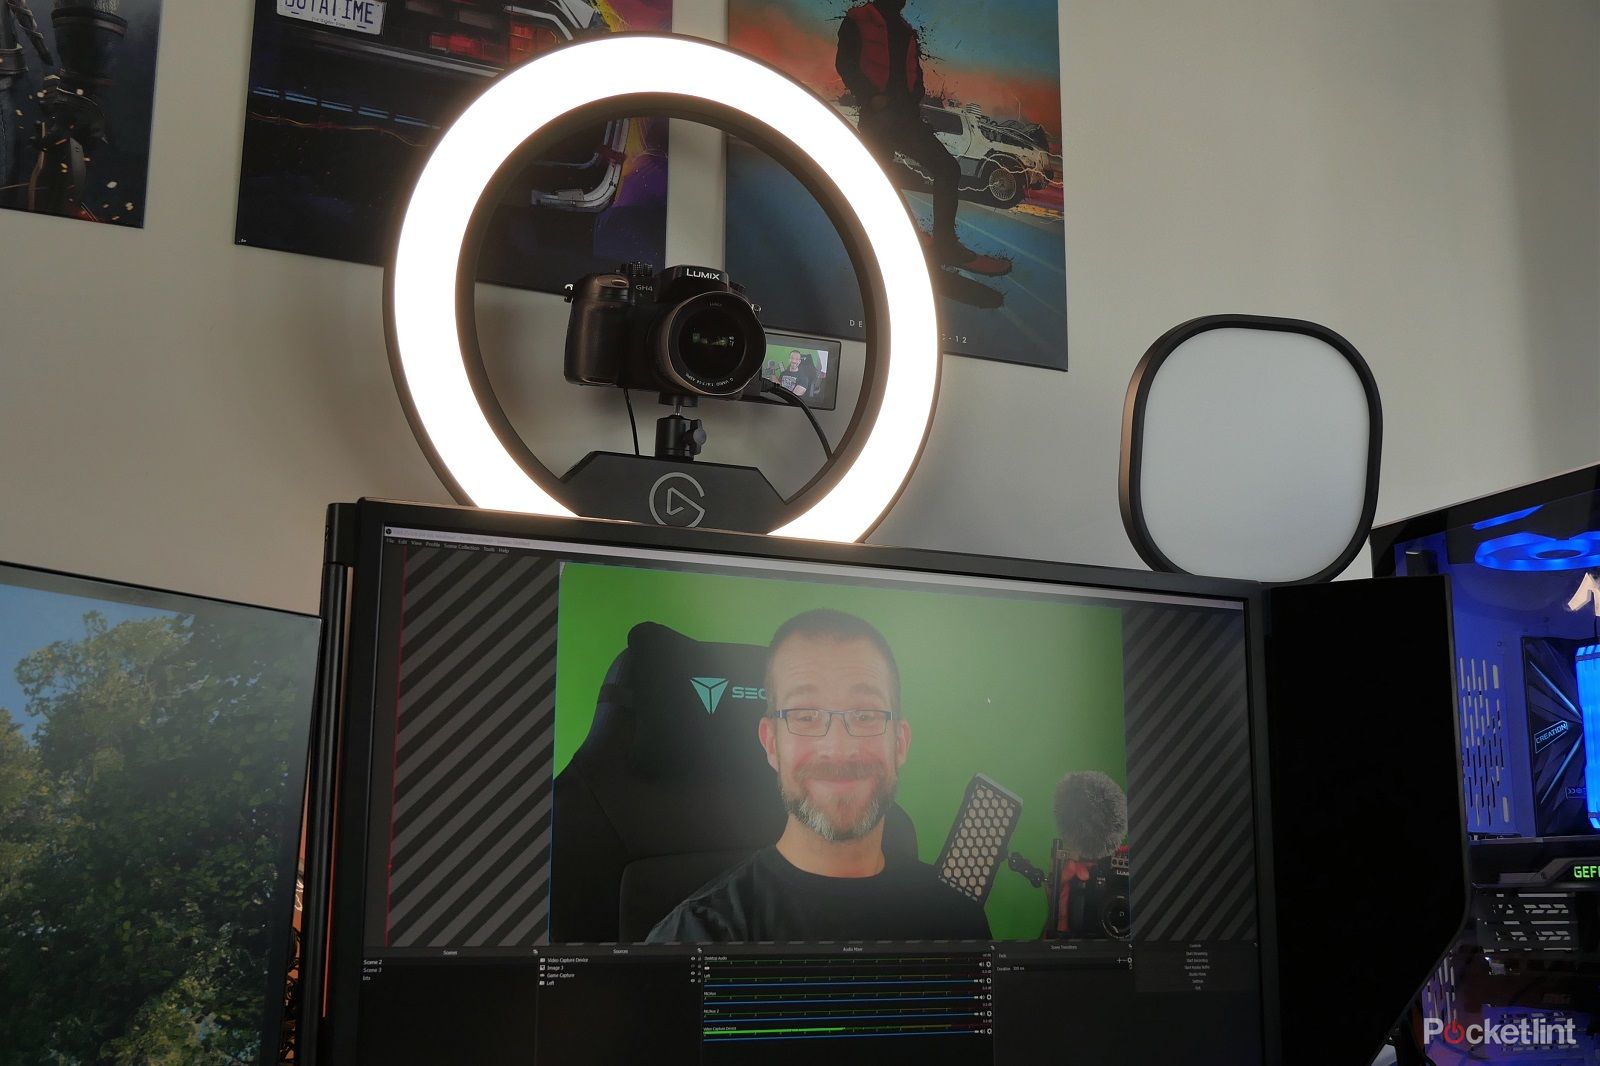 Best lighting for streamers in 2023: Top key lights for Twitch and